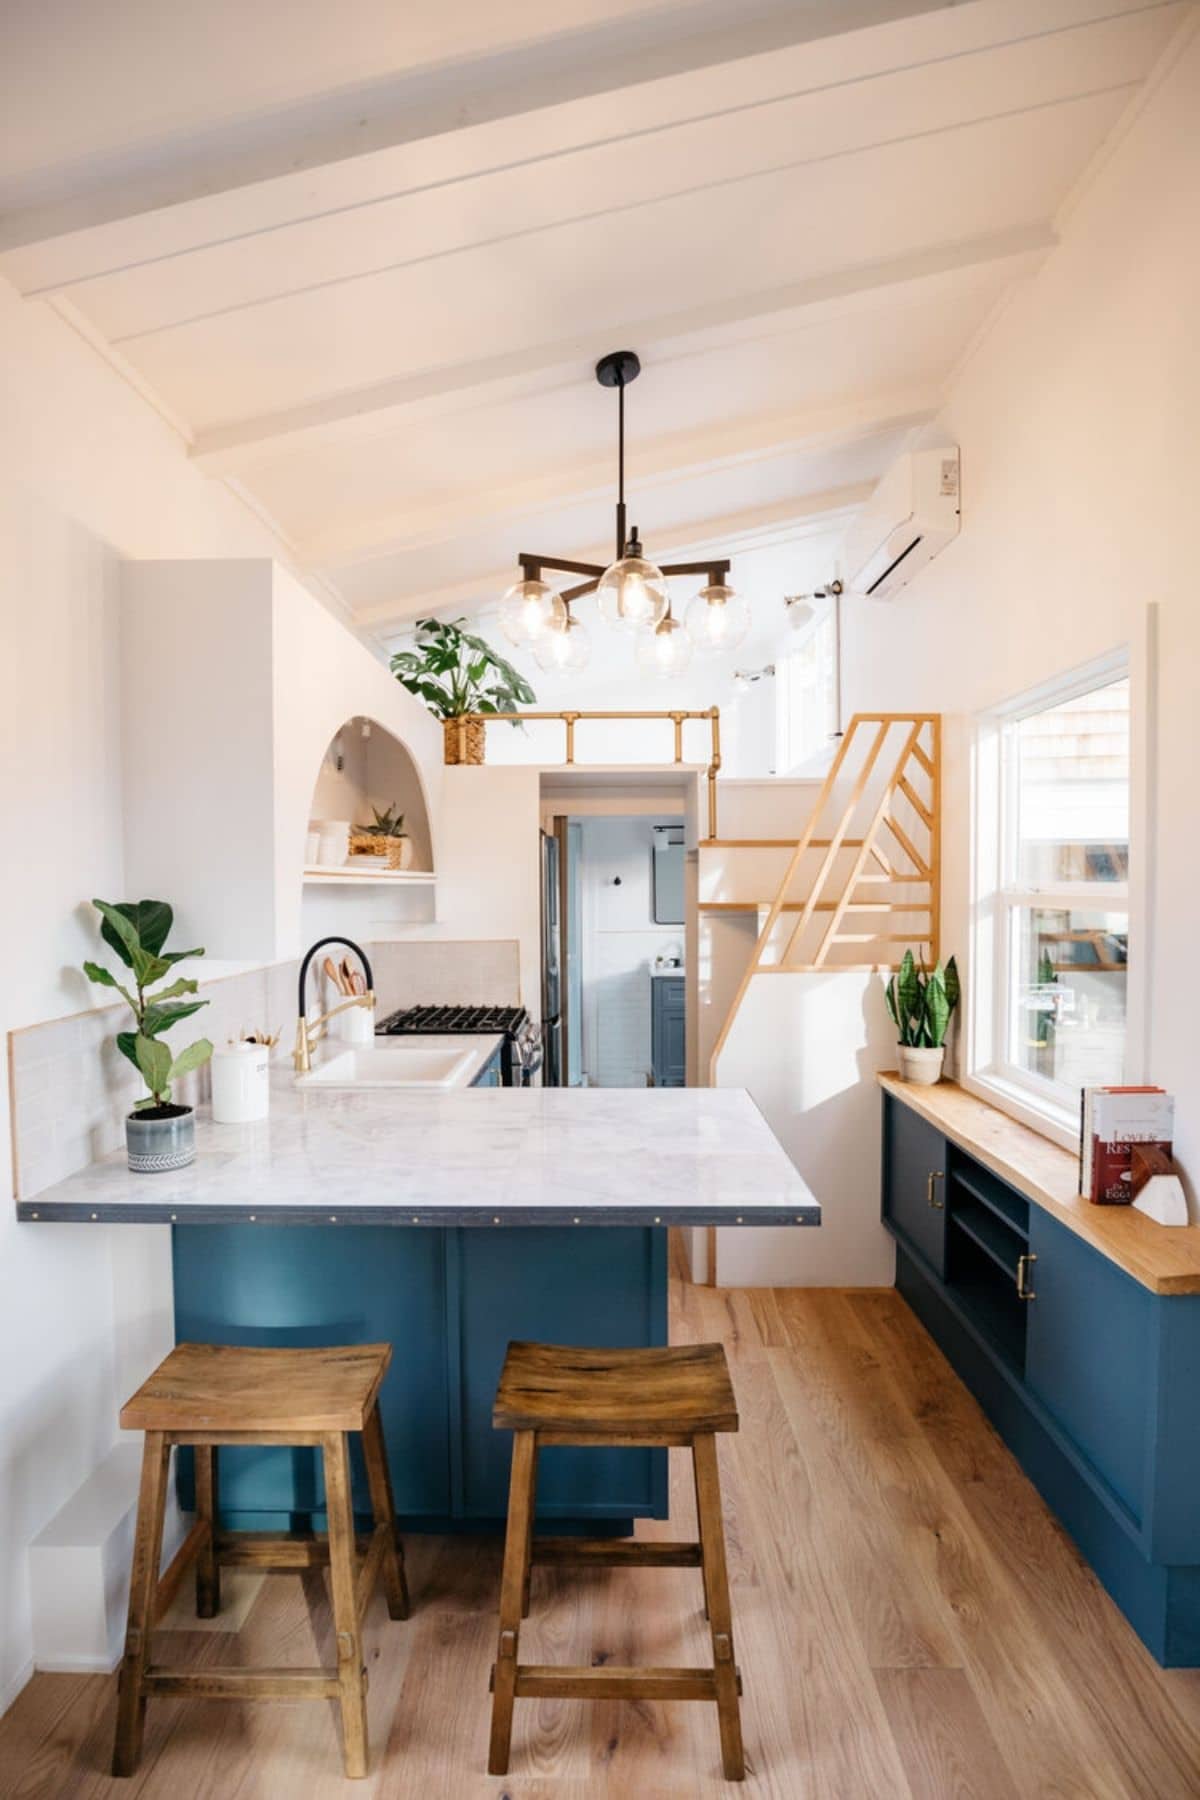 Teal cabinets in kitchen of tiny home with wood stools in foreground